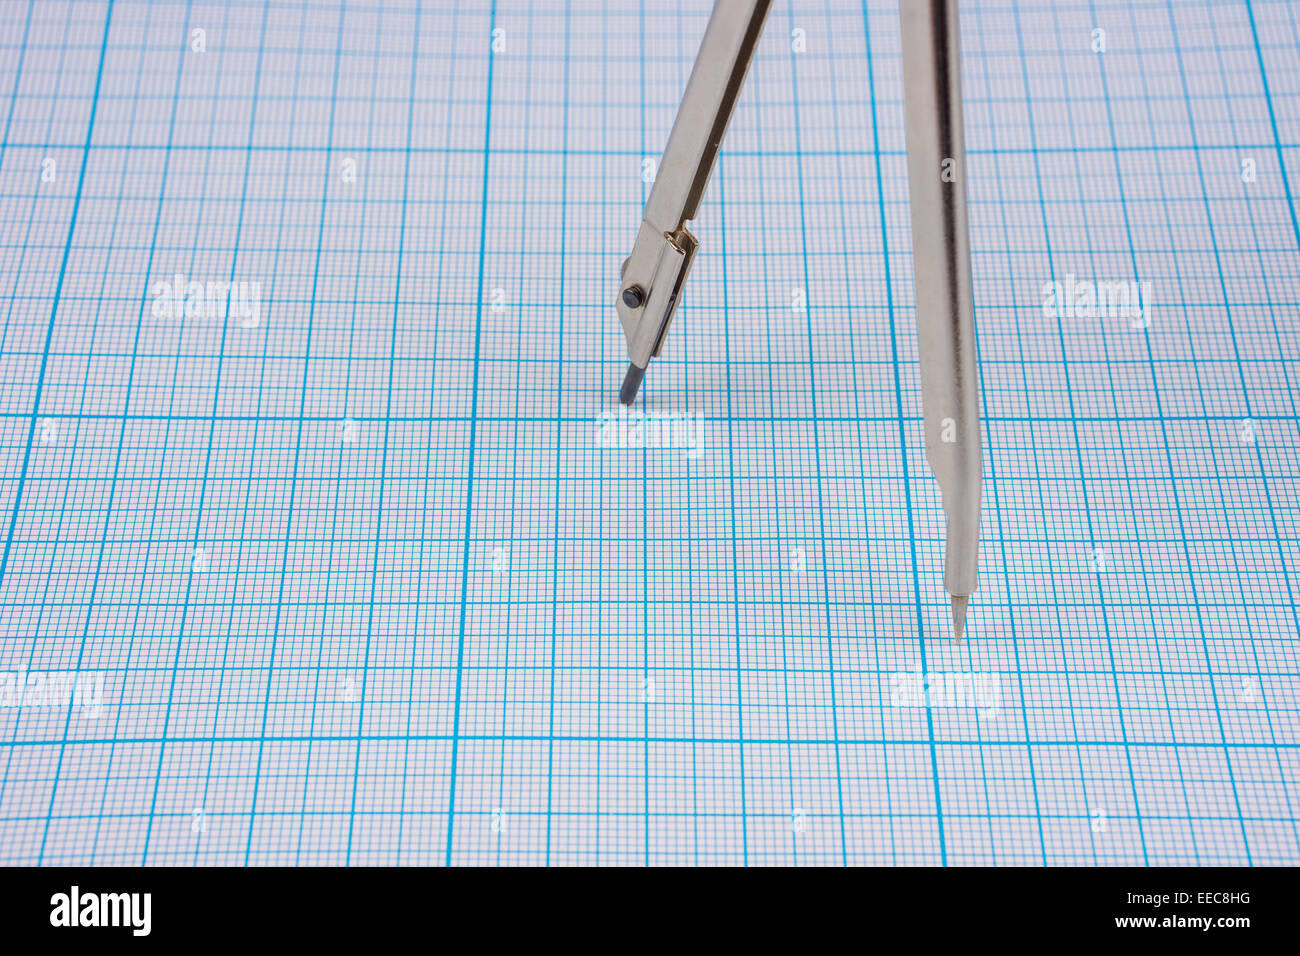 Compasses legs on graph paper background Stock Photo